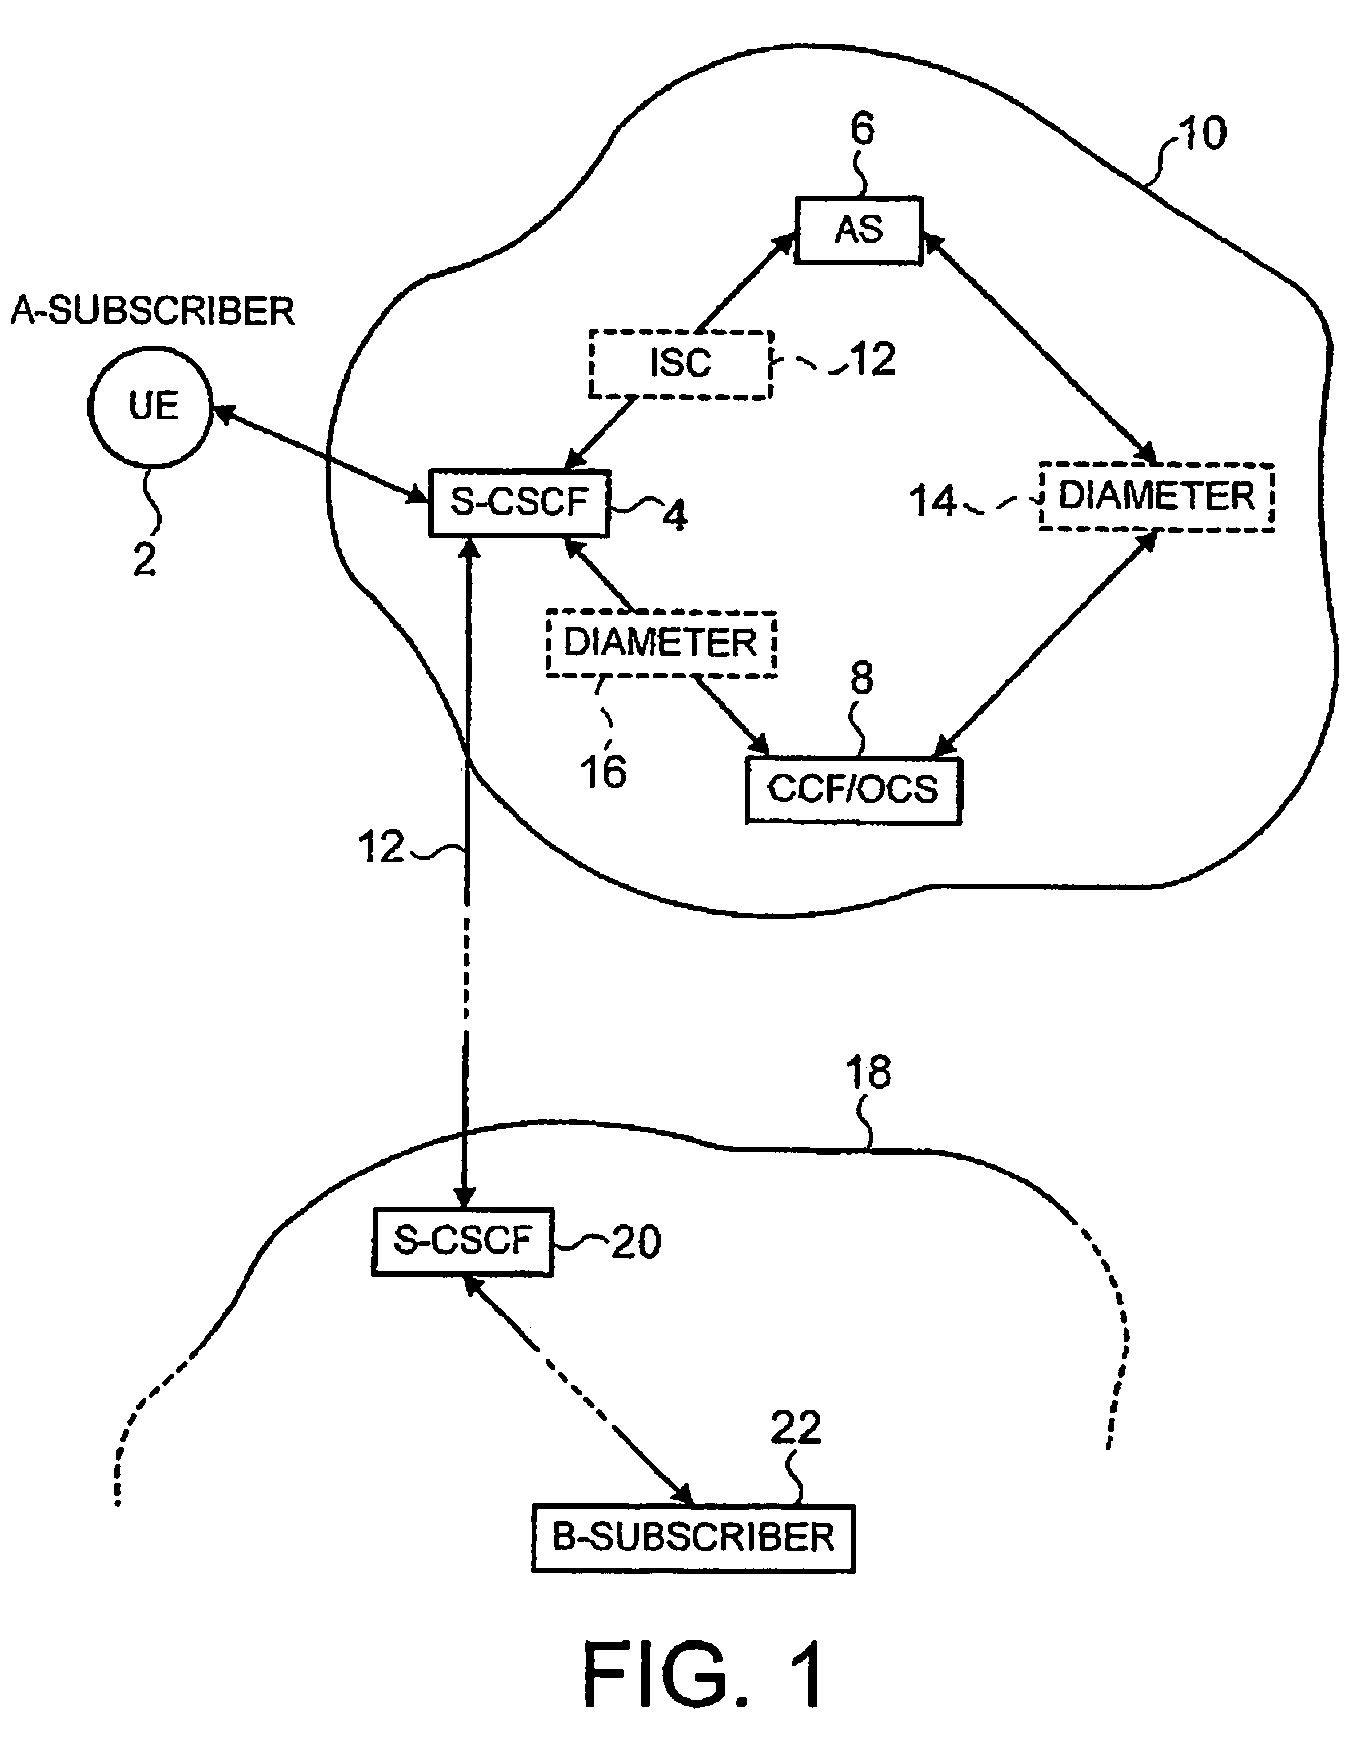 Charging for an IP based communication system